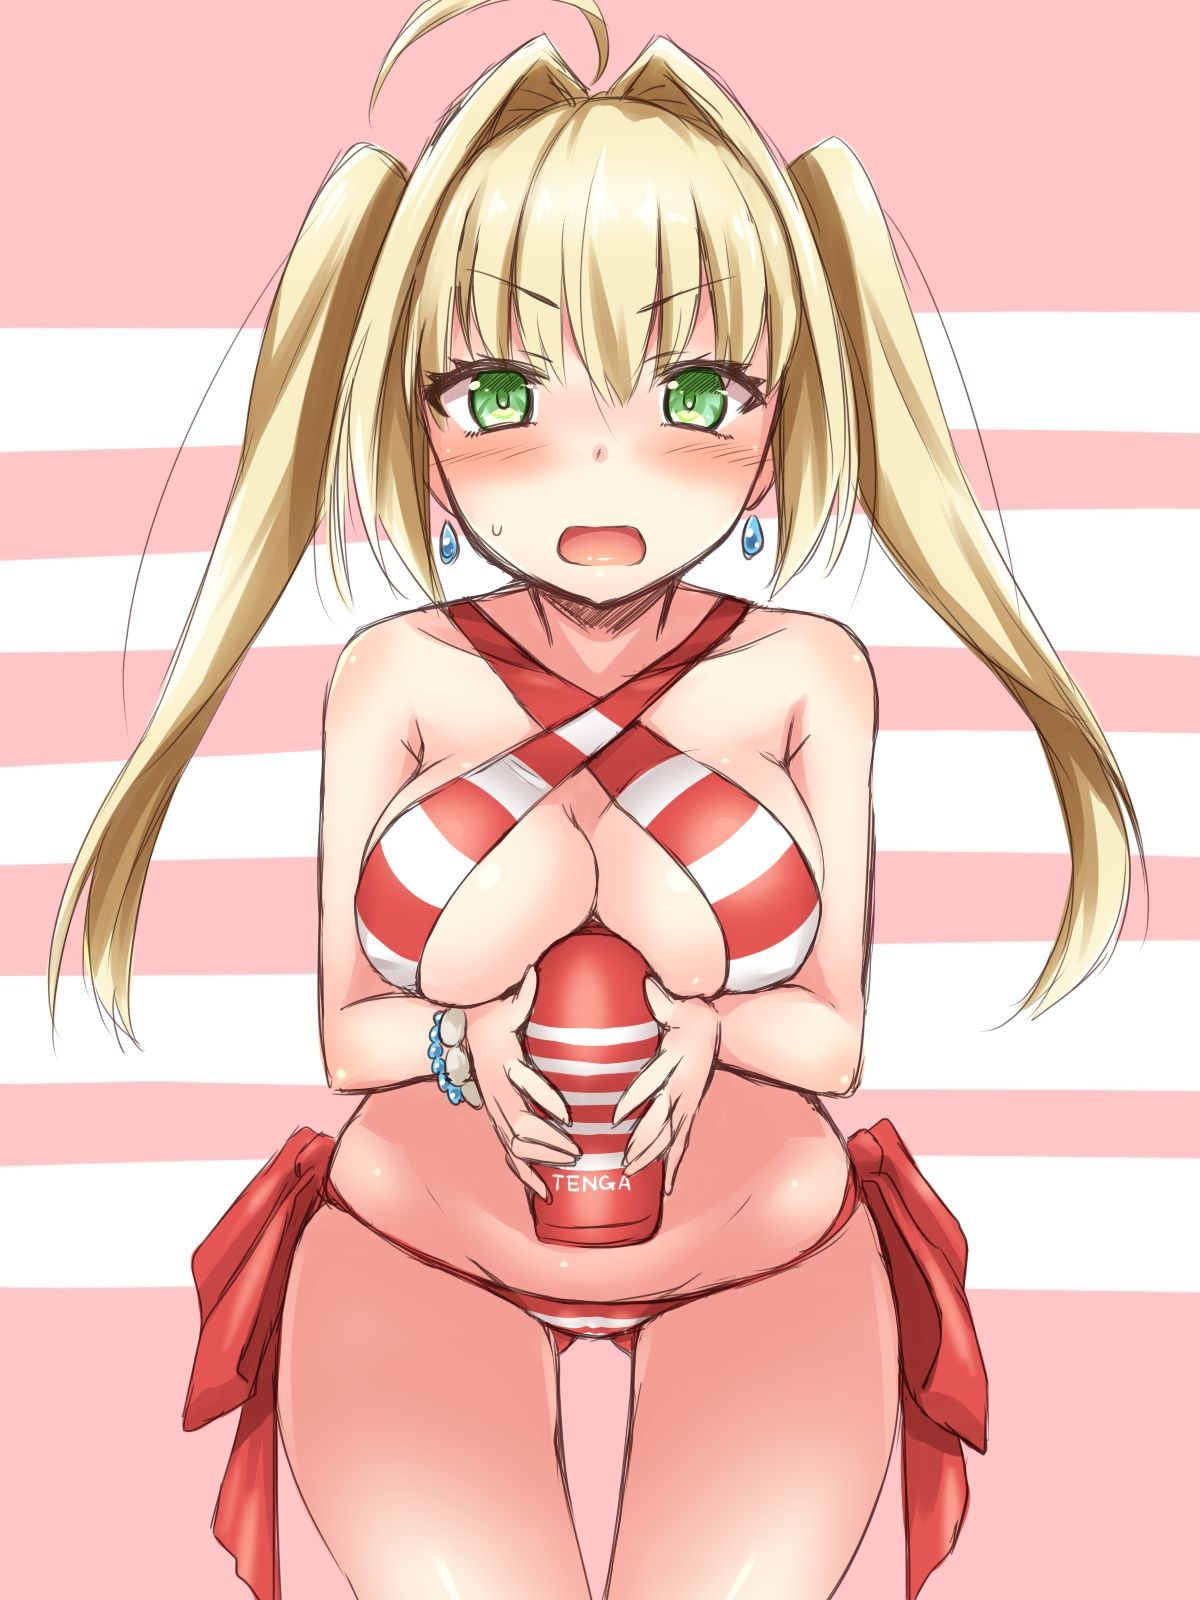 [Secondary ZIP] is about to start anime 100 pieces of cute image summary of Nero Claudius so soon 2